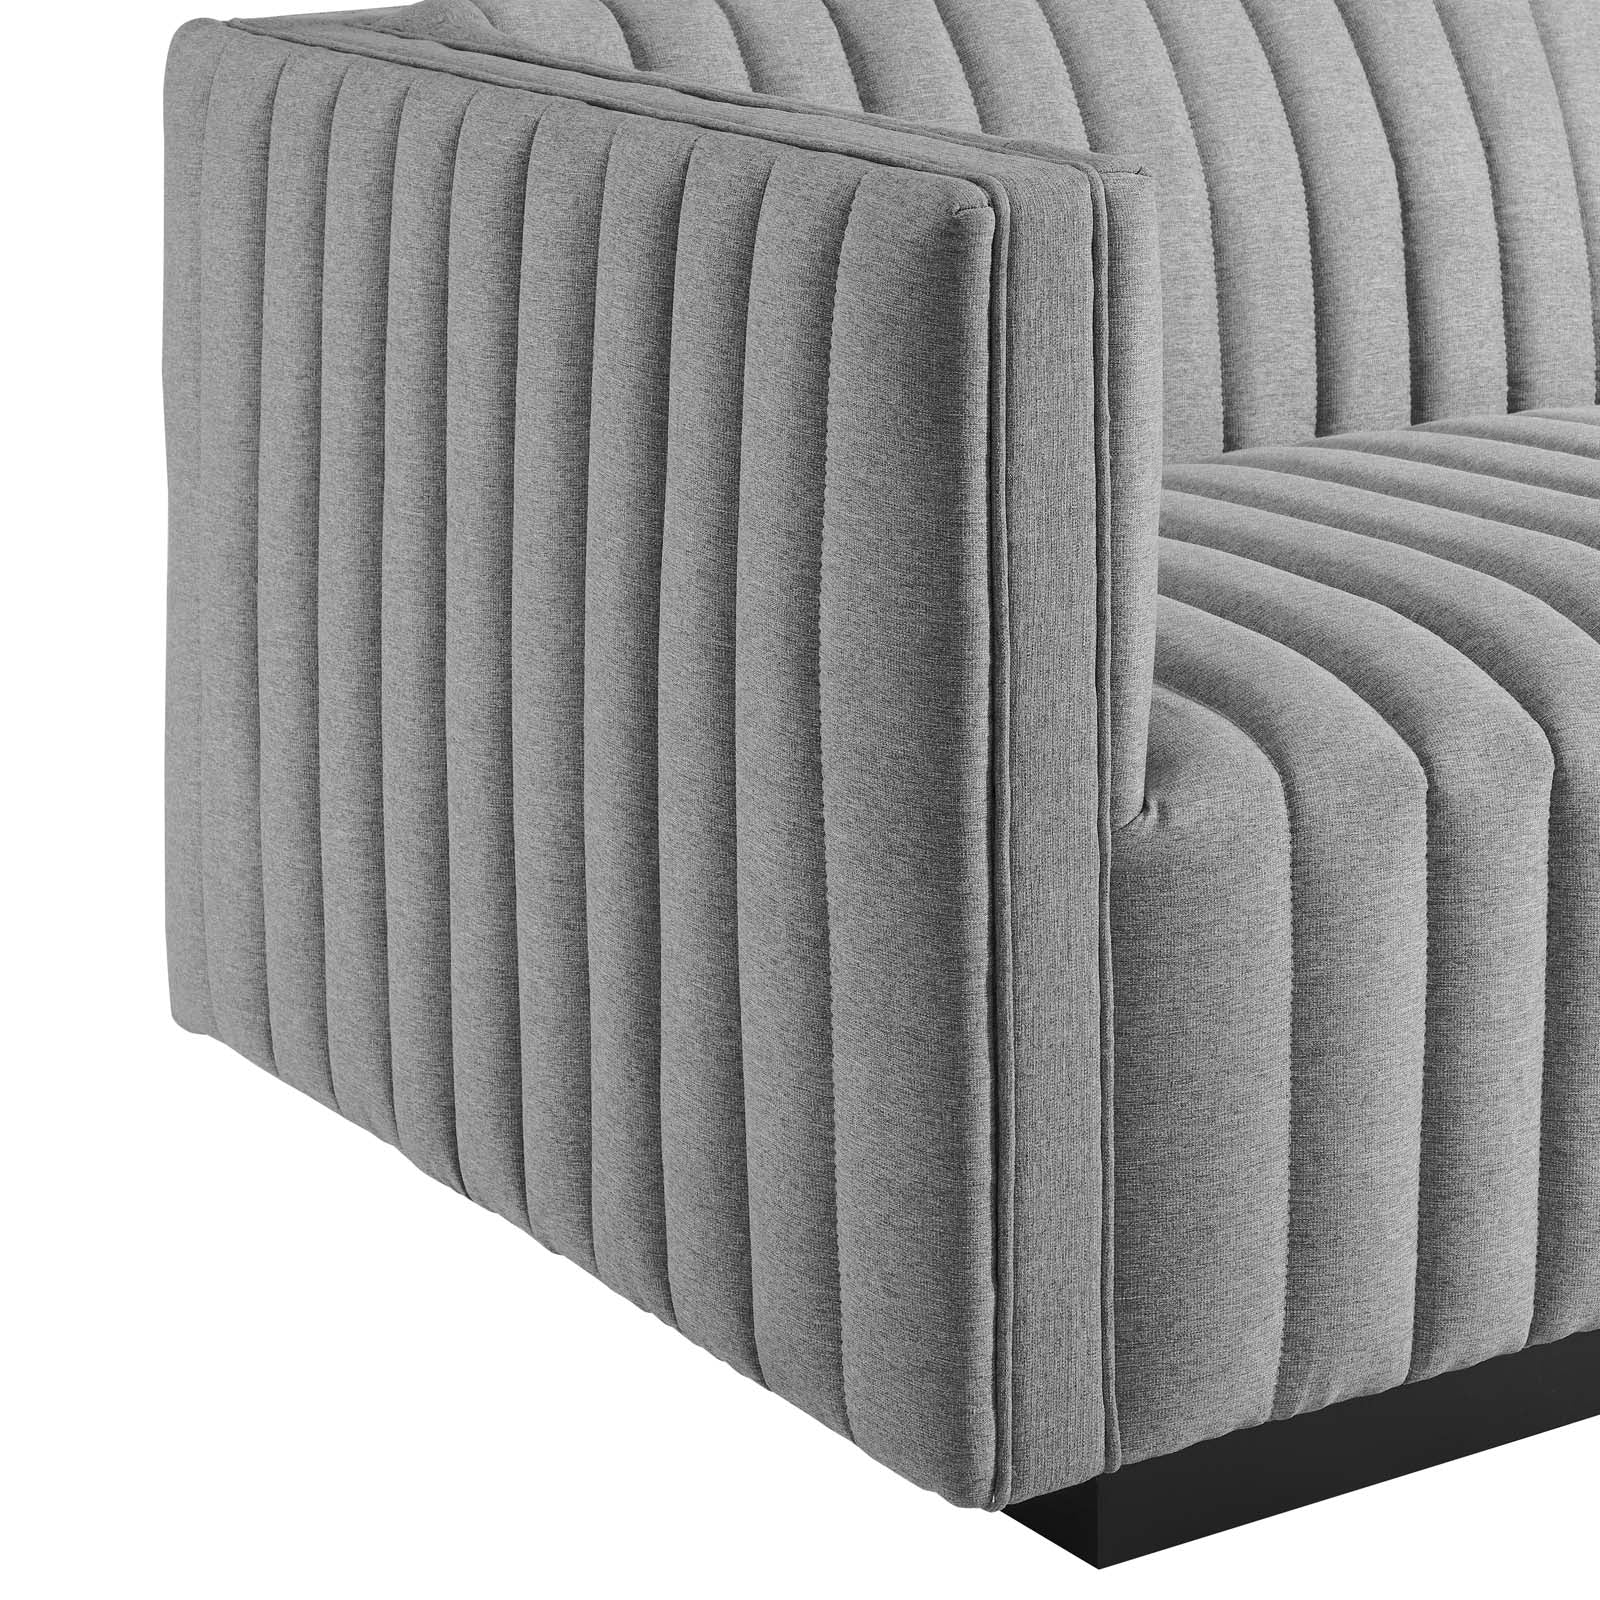 Conjure Channel Tufted Upholstered Fabric 4-Piece Sofa